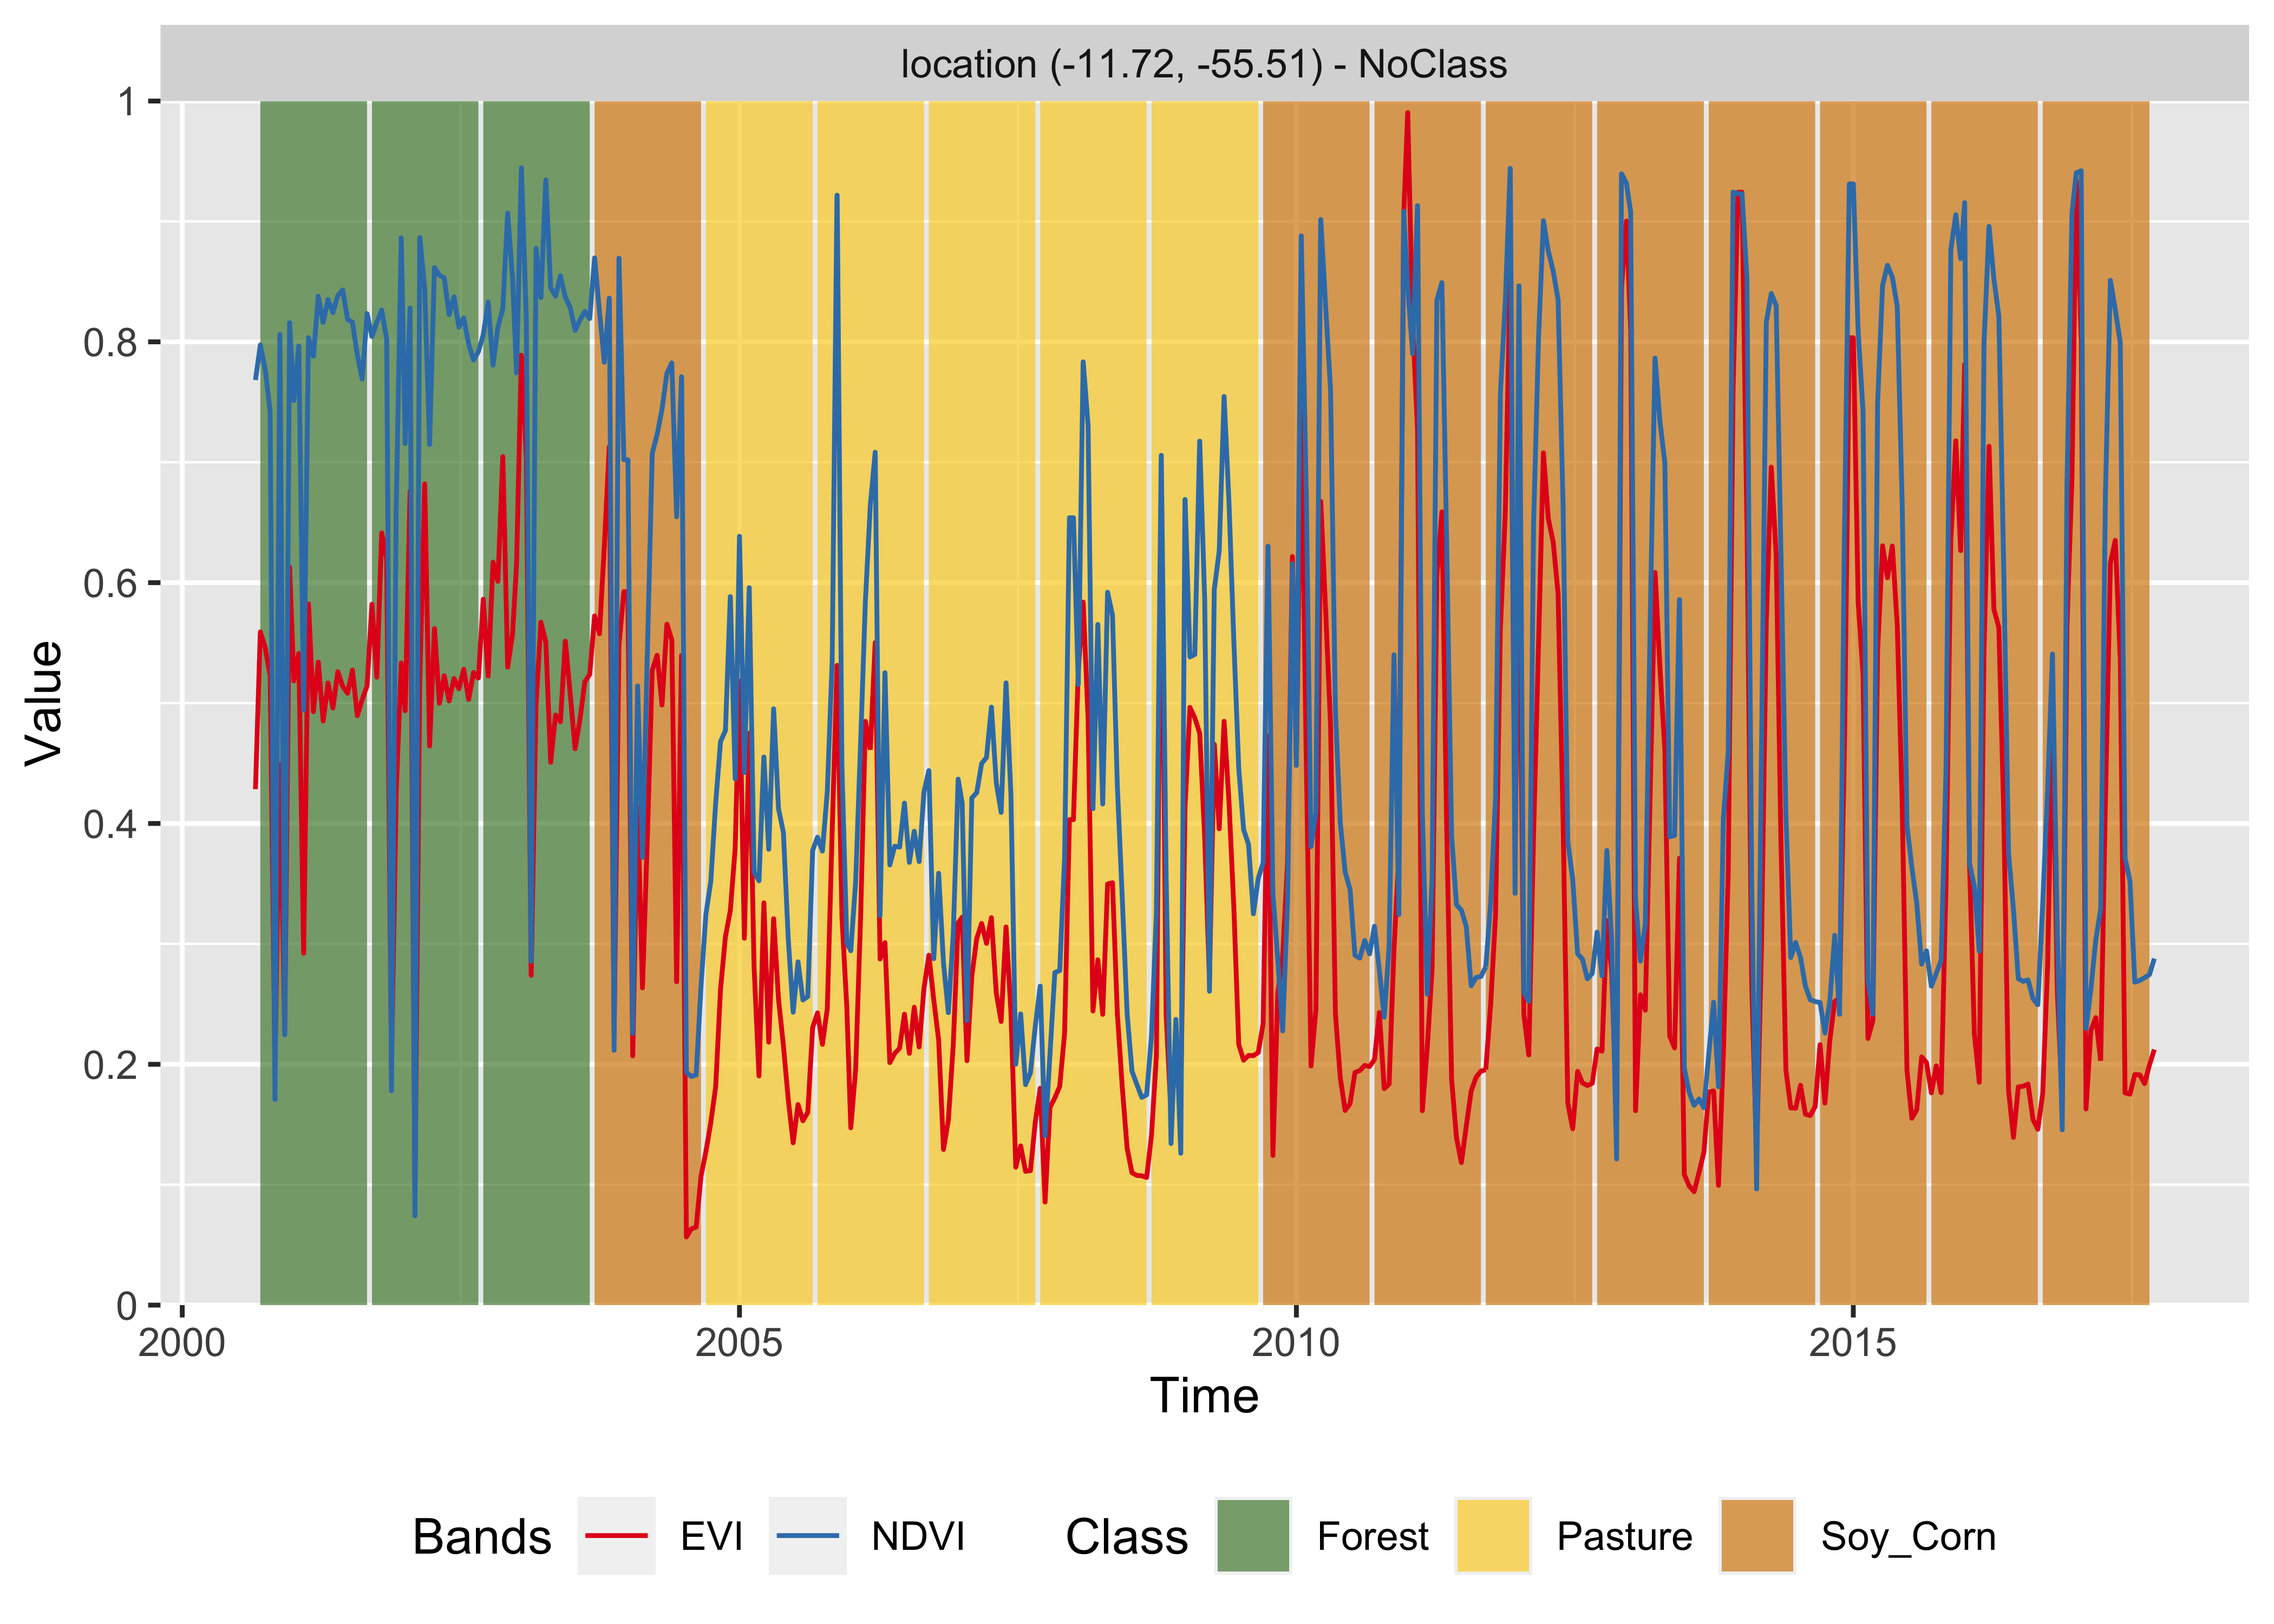 Classification of time series using XGBoost (Source: Authors).